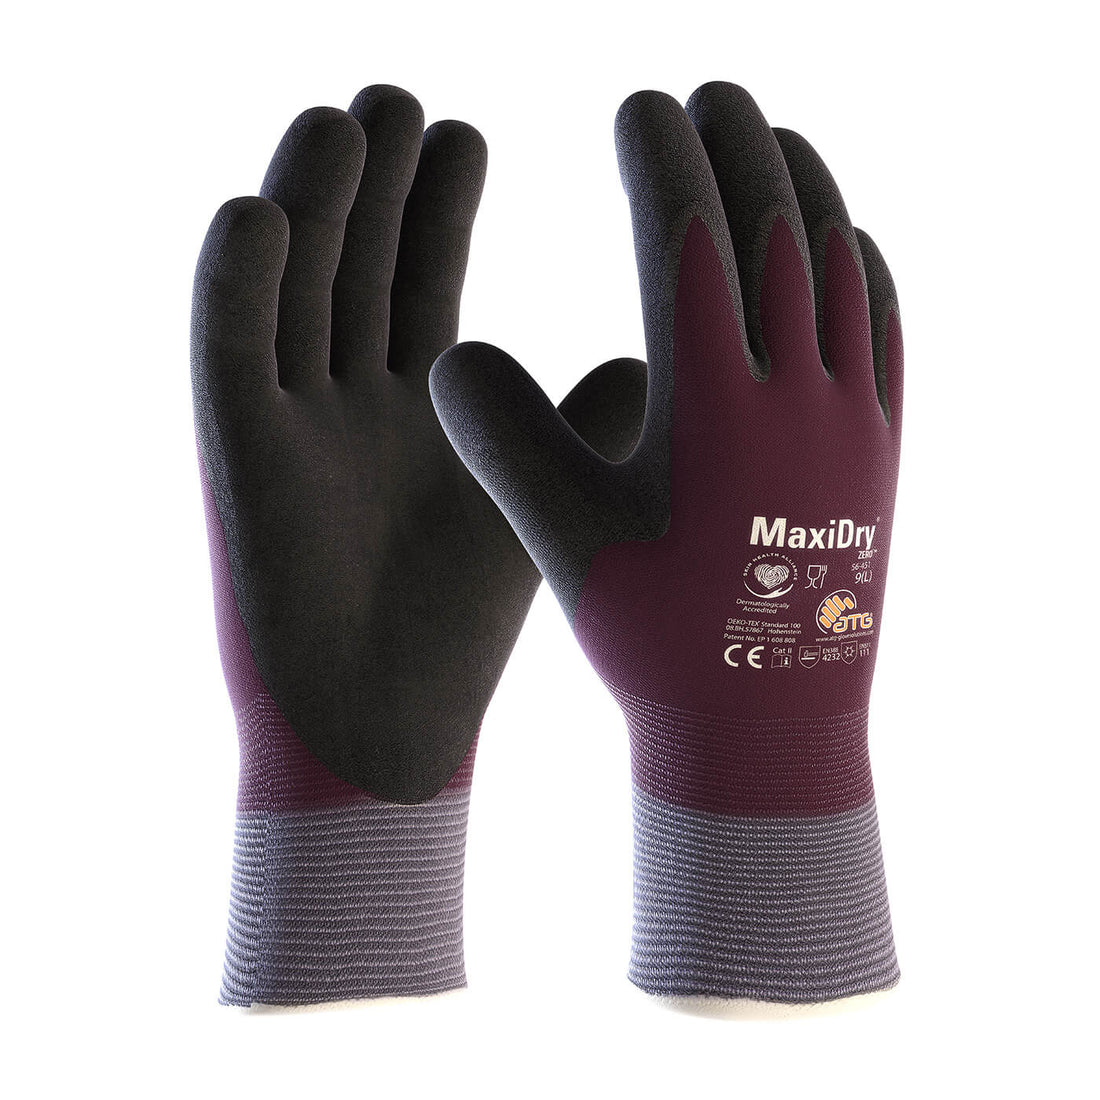 Best Gloves for Christmas Gifts